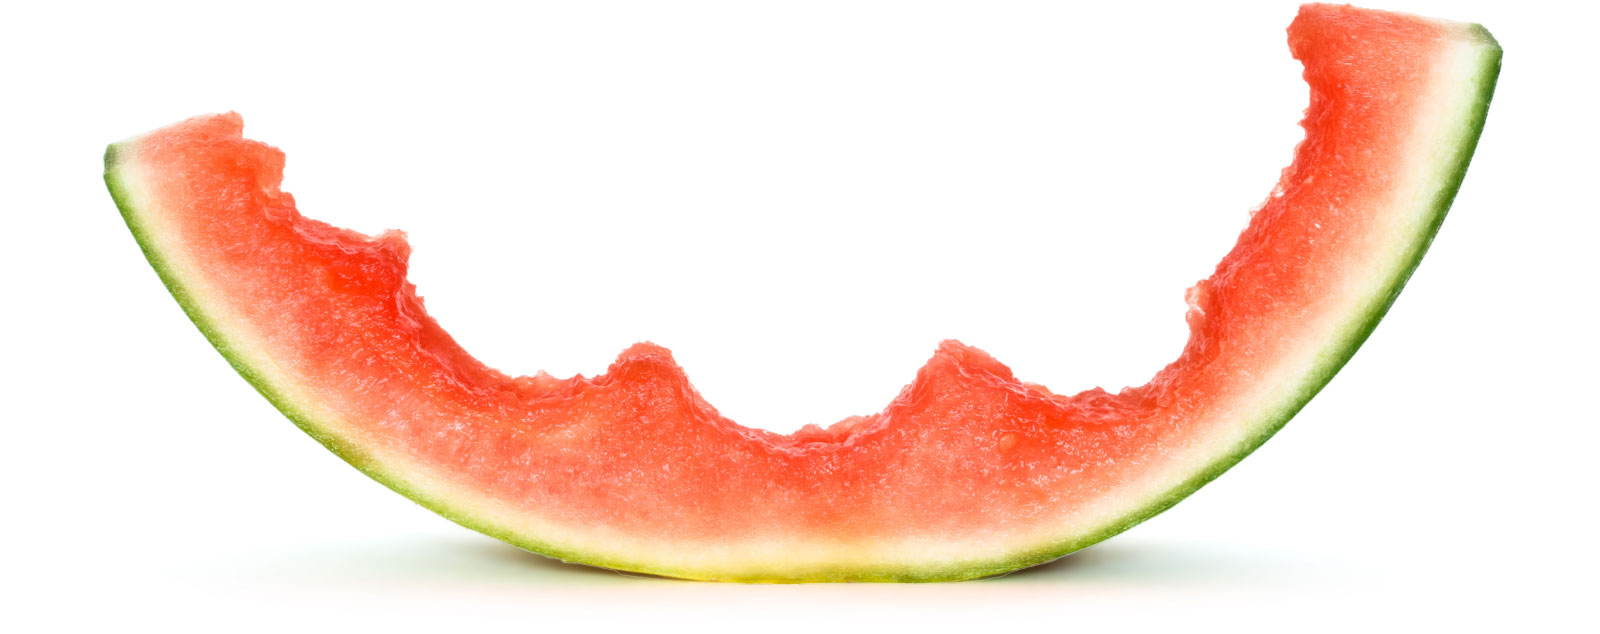 A watermelon rind in the shape of a smile.